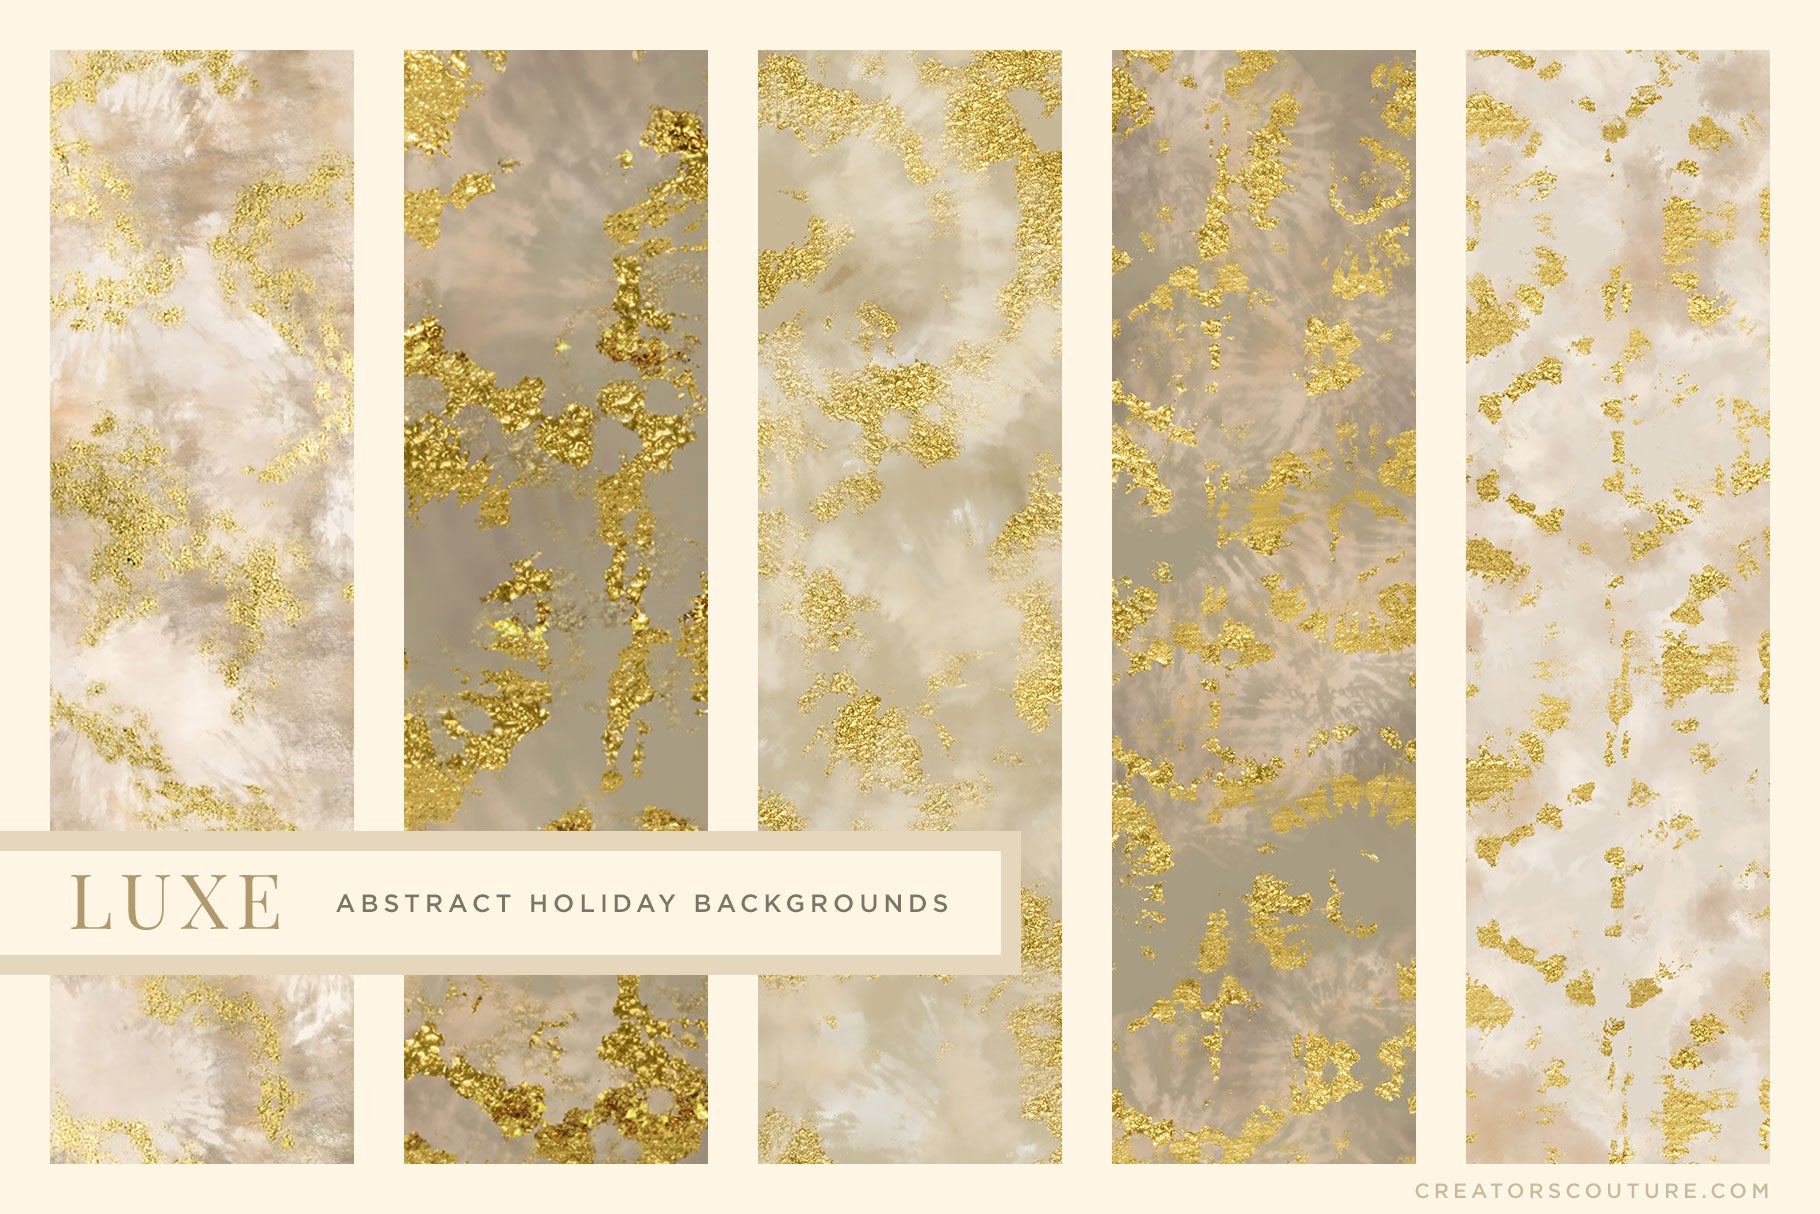 Luxe Christmas: Abstract Holiday Painted Backgrounds, white and gold marbled designs